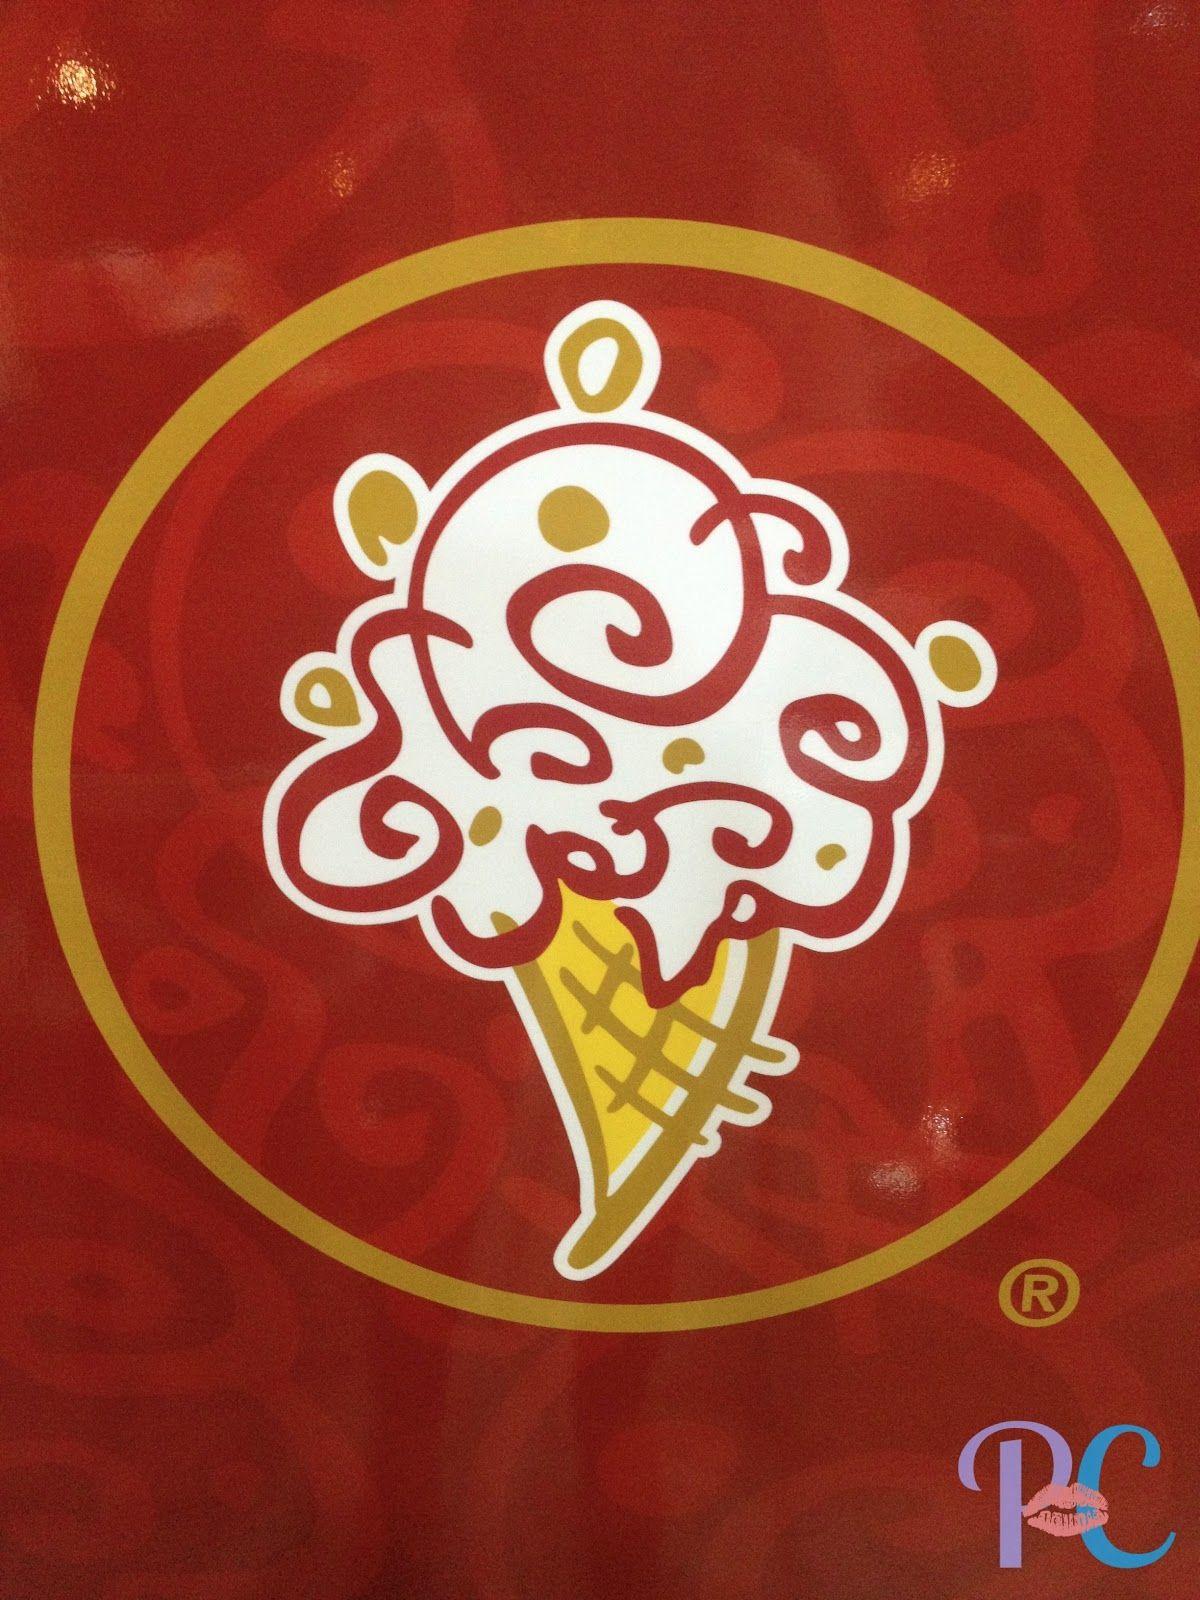 Famous Ice Cream Logo - Pleasantly Chic has moved!: Goodie Foodie: Cold Stone Creamery